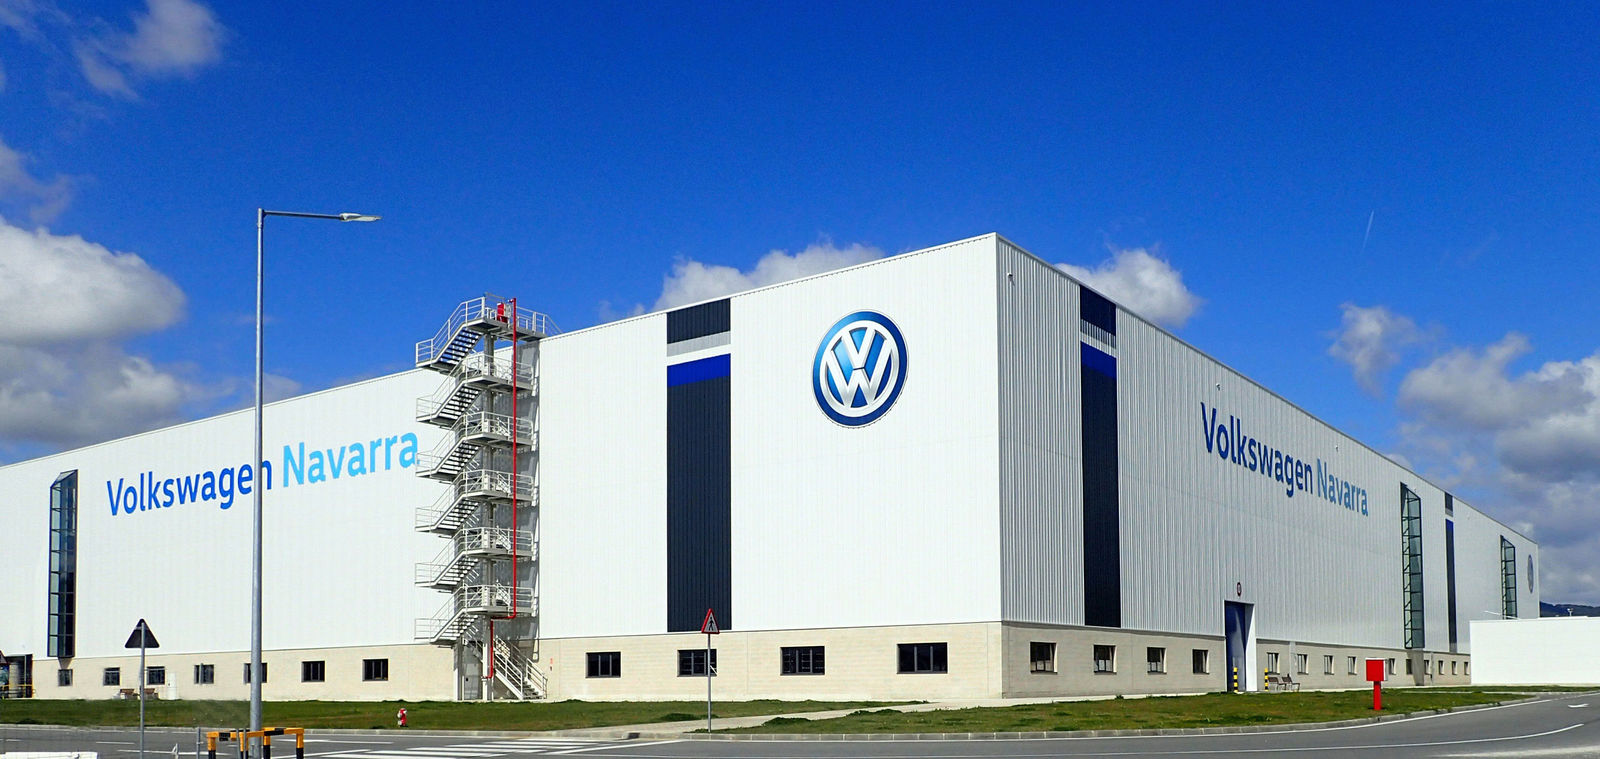 Volkswagen Navarra, view from outside the factory